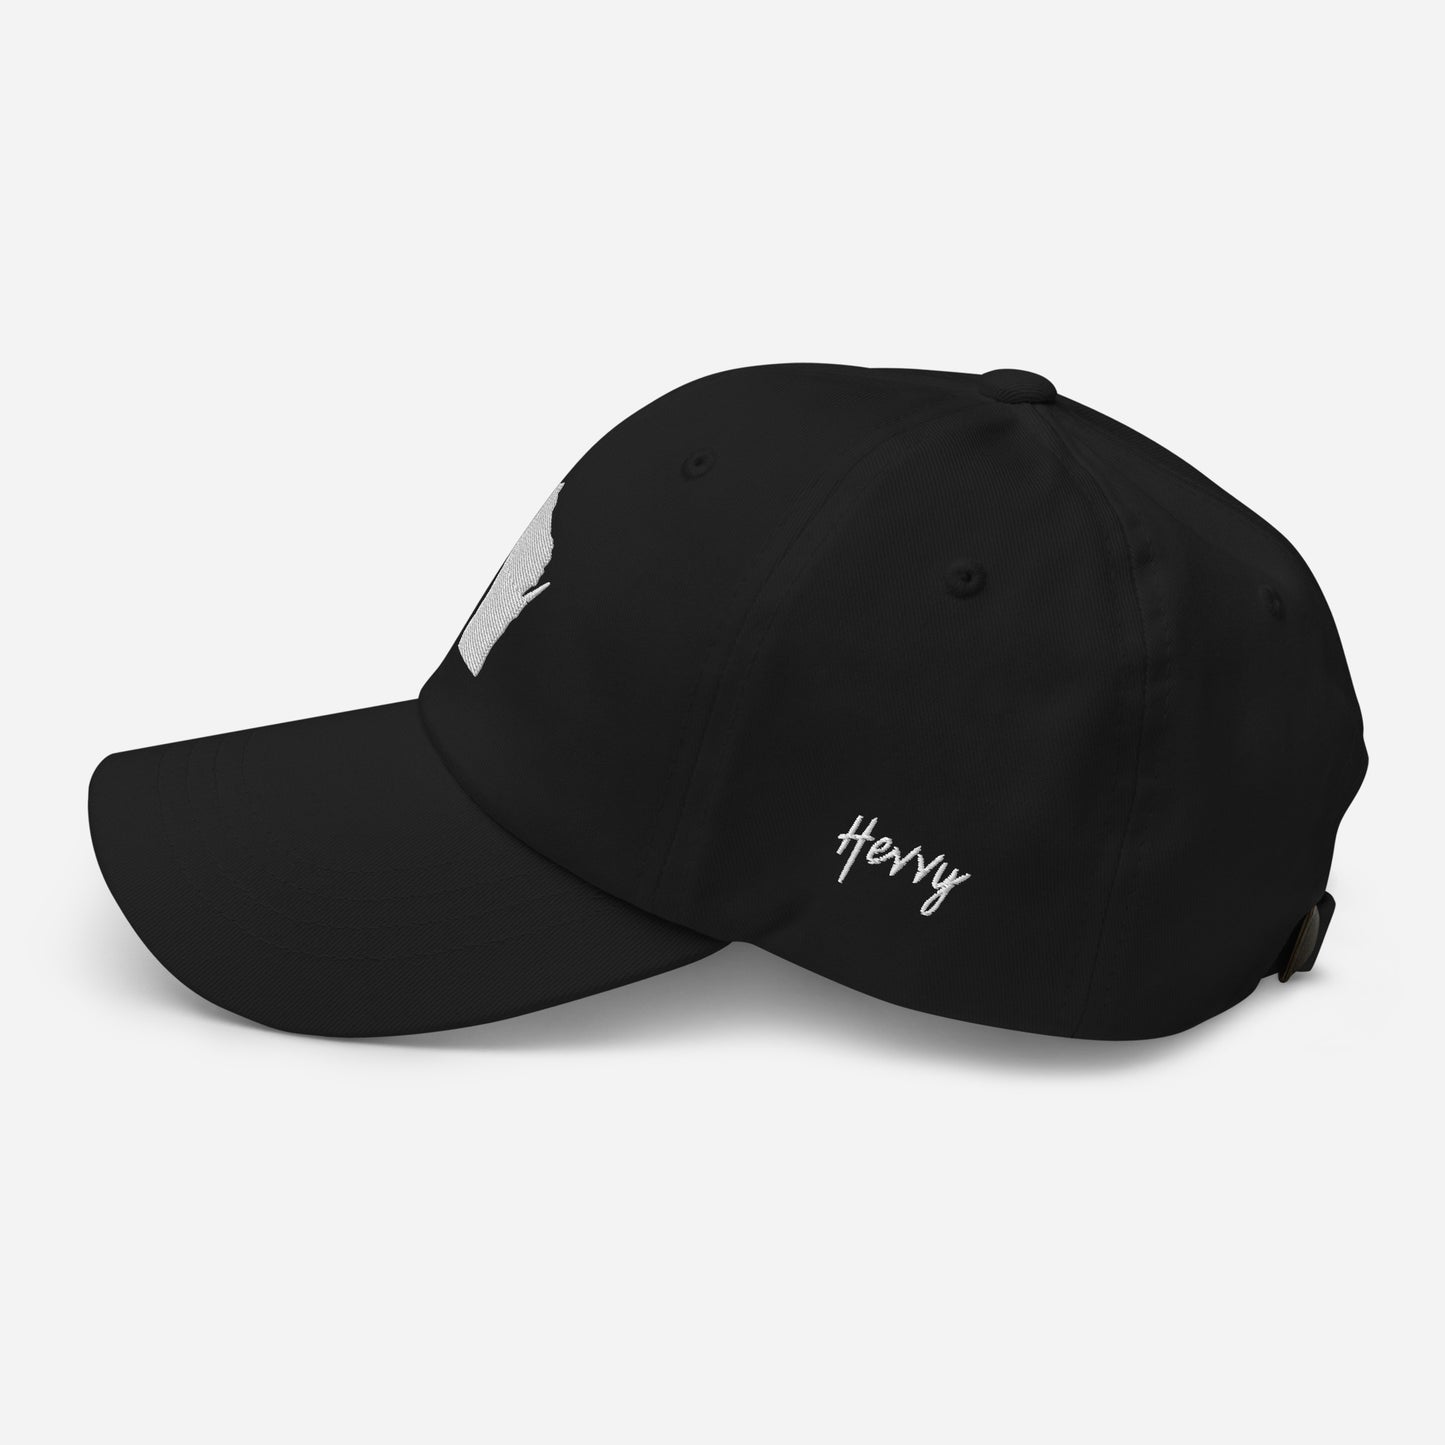 Wisconsin State Silhouette Dad Hat